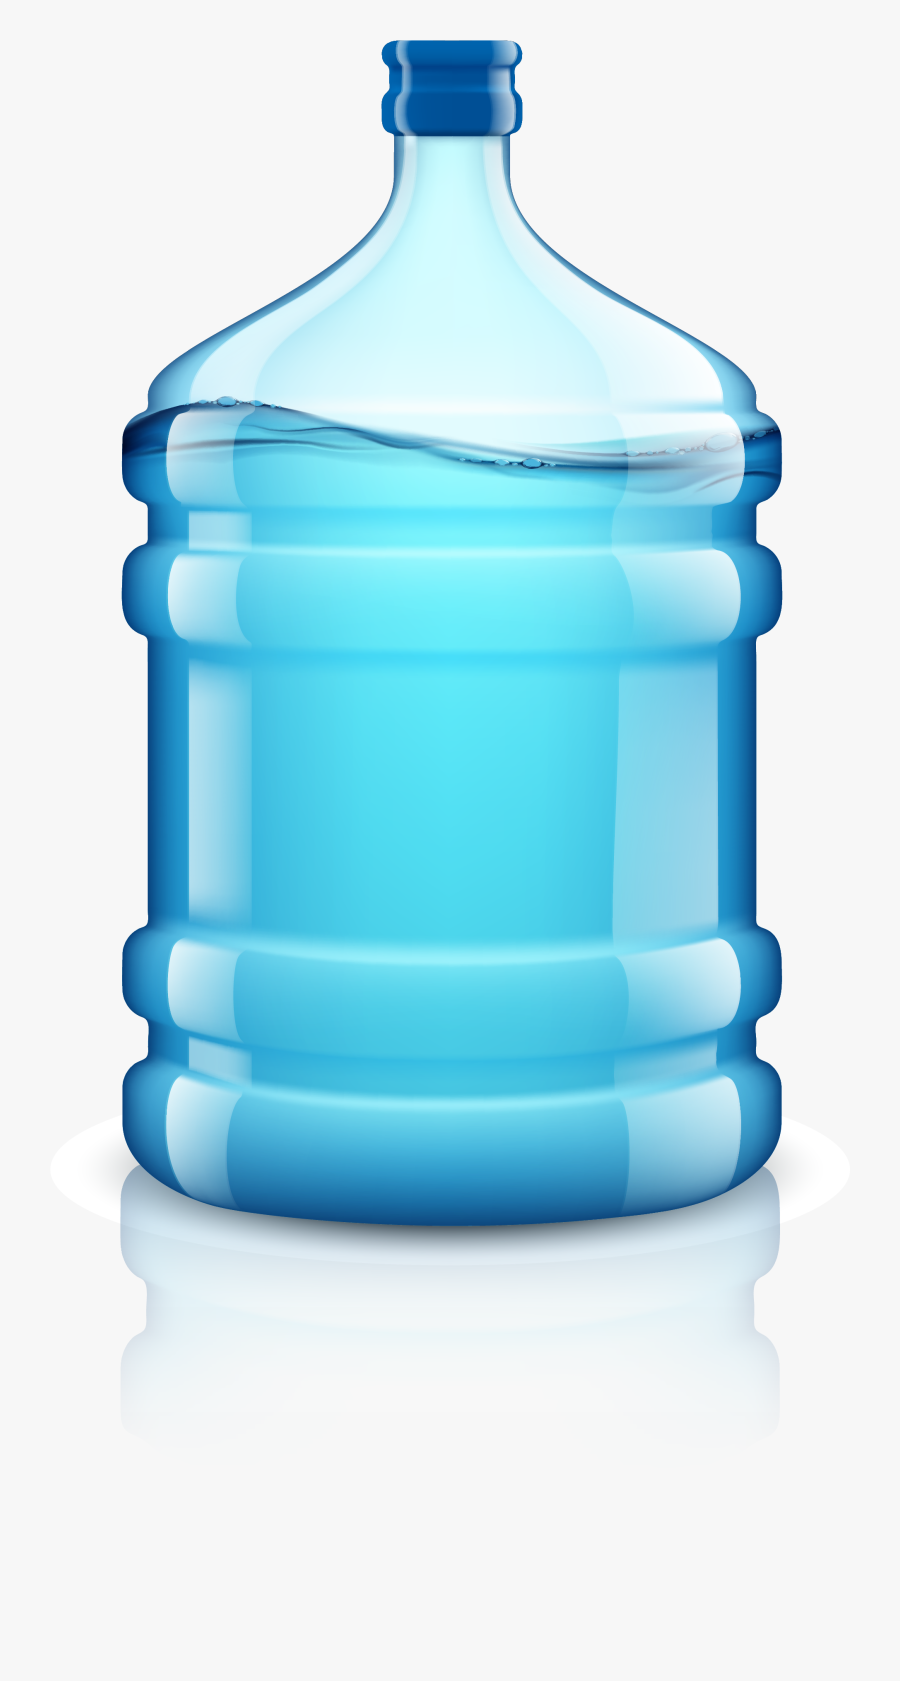 Water Drinking Bottled Pure Bottle Free Download Png - Big Water Bottles Drawing, Transparent Clipart